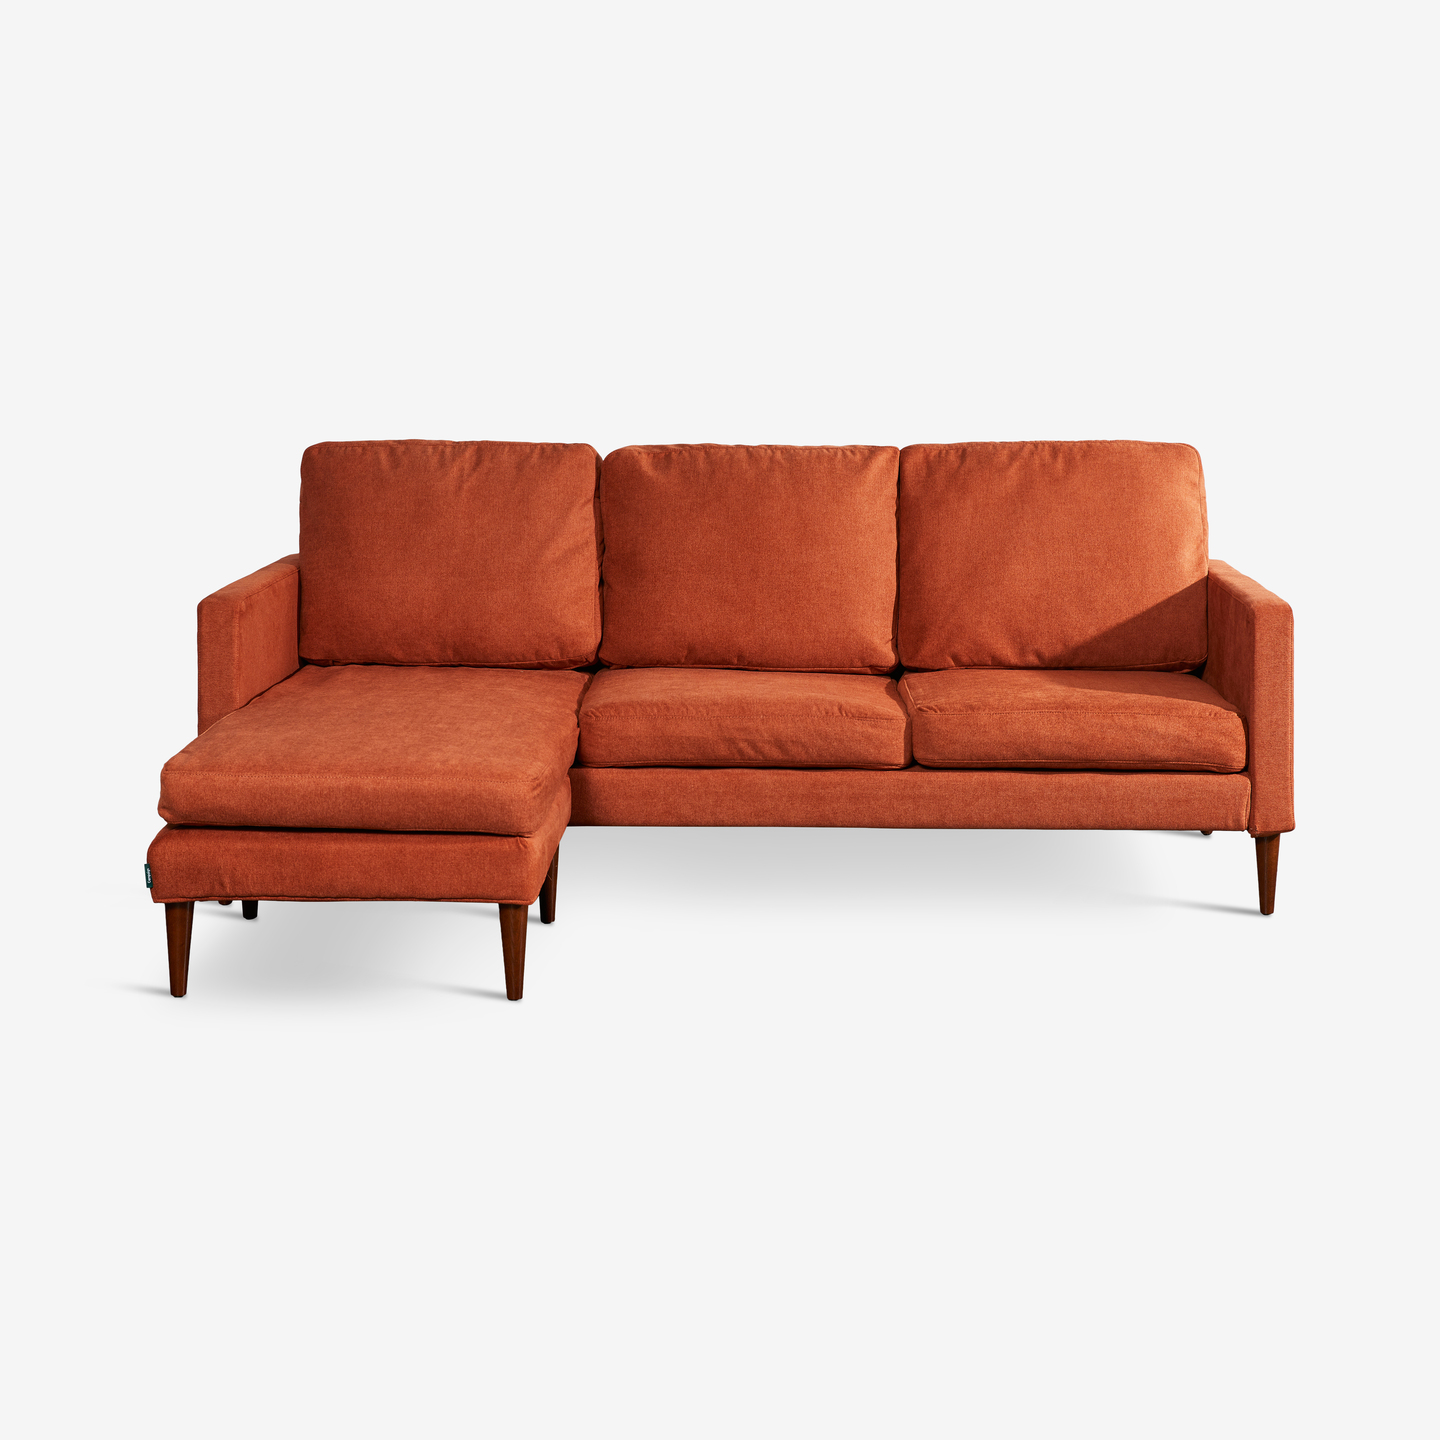 481_Campaign-Sofa-Sectional-Mojave-Orange_Flat-Front 2020